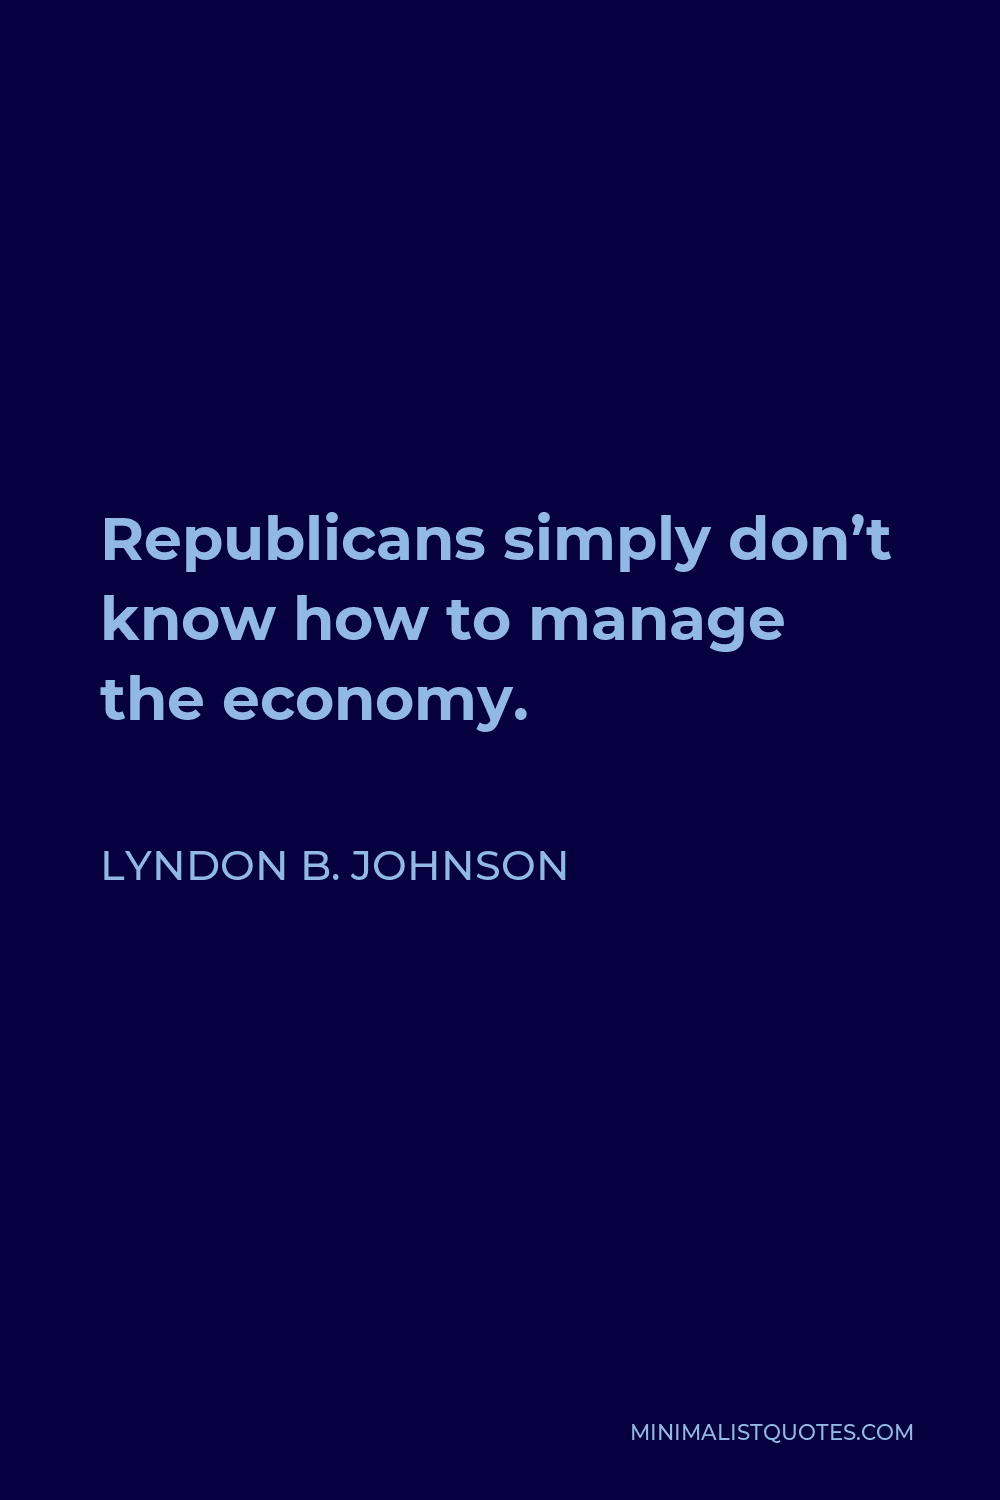 Lyndon B. Johnson Quote - Republicans simply don’t know how to manage the economy.